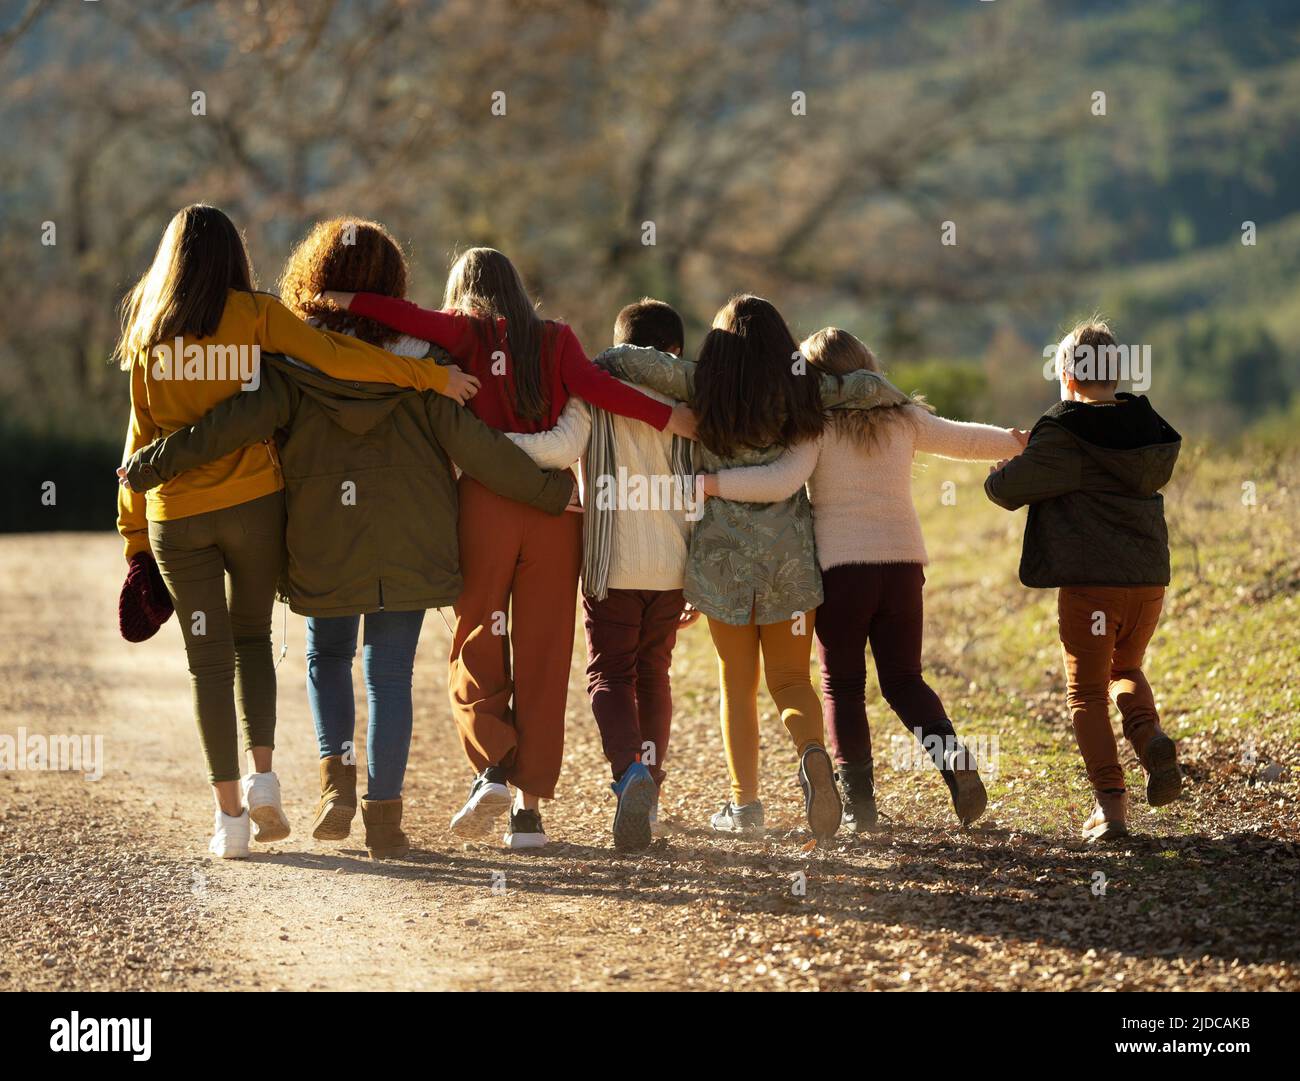 Young children teenagers go ahead in the autumn time Stock Photo